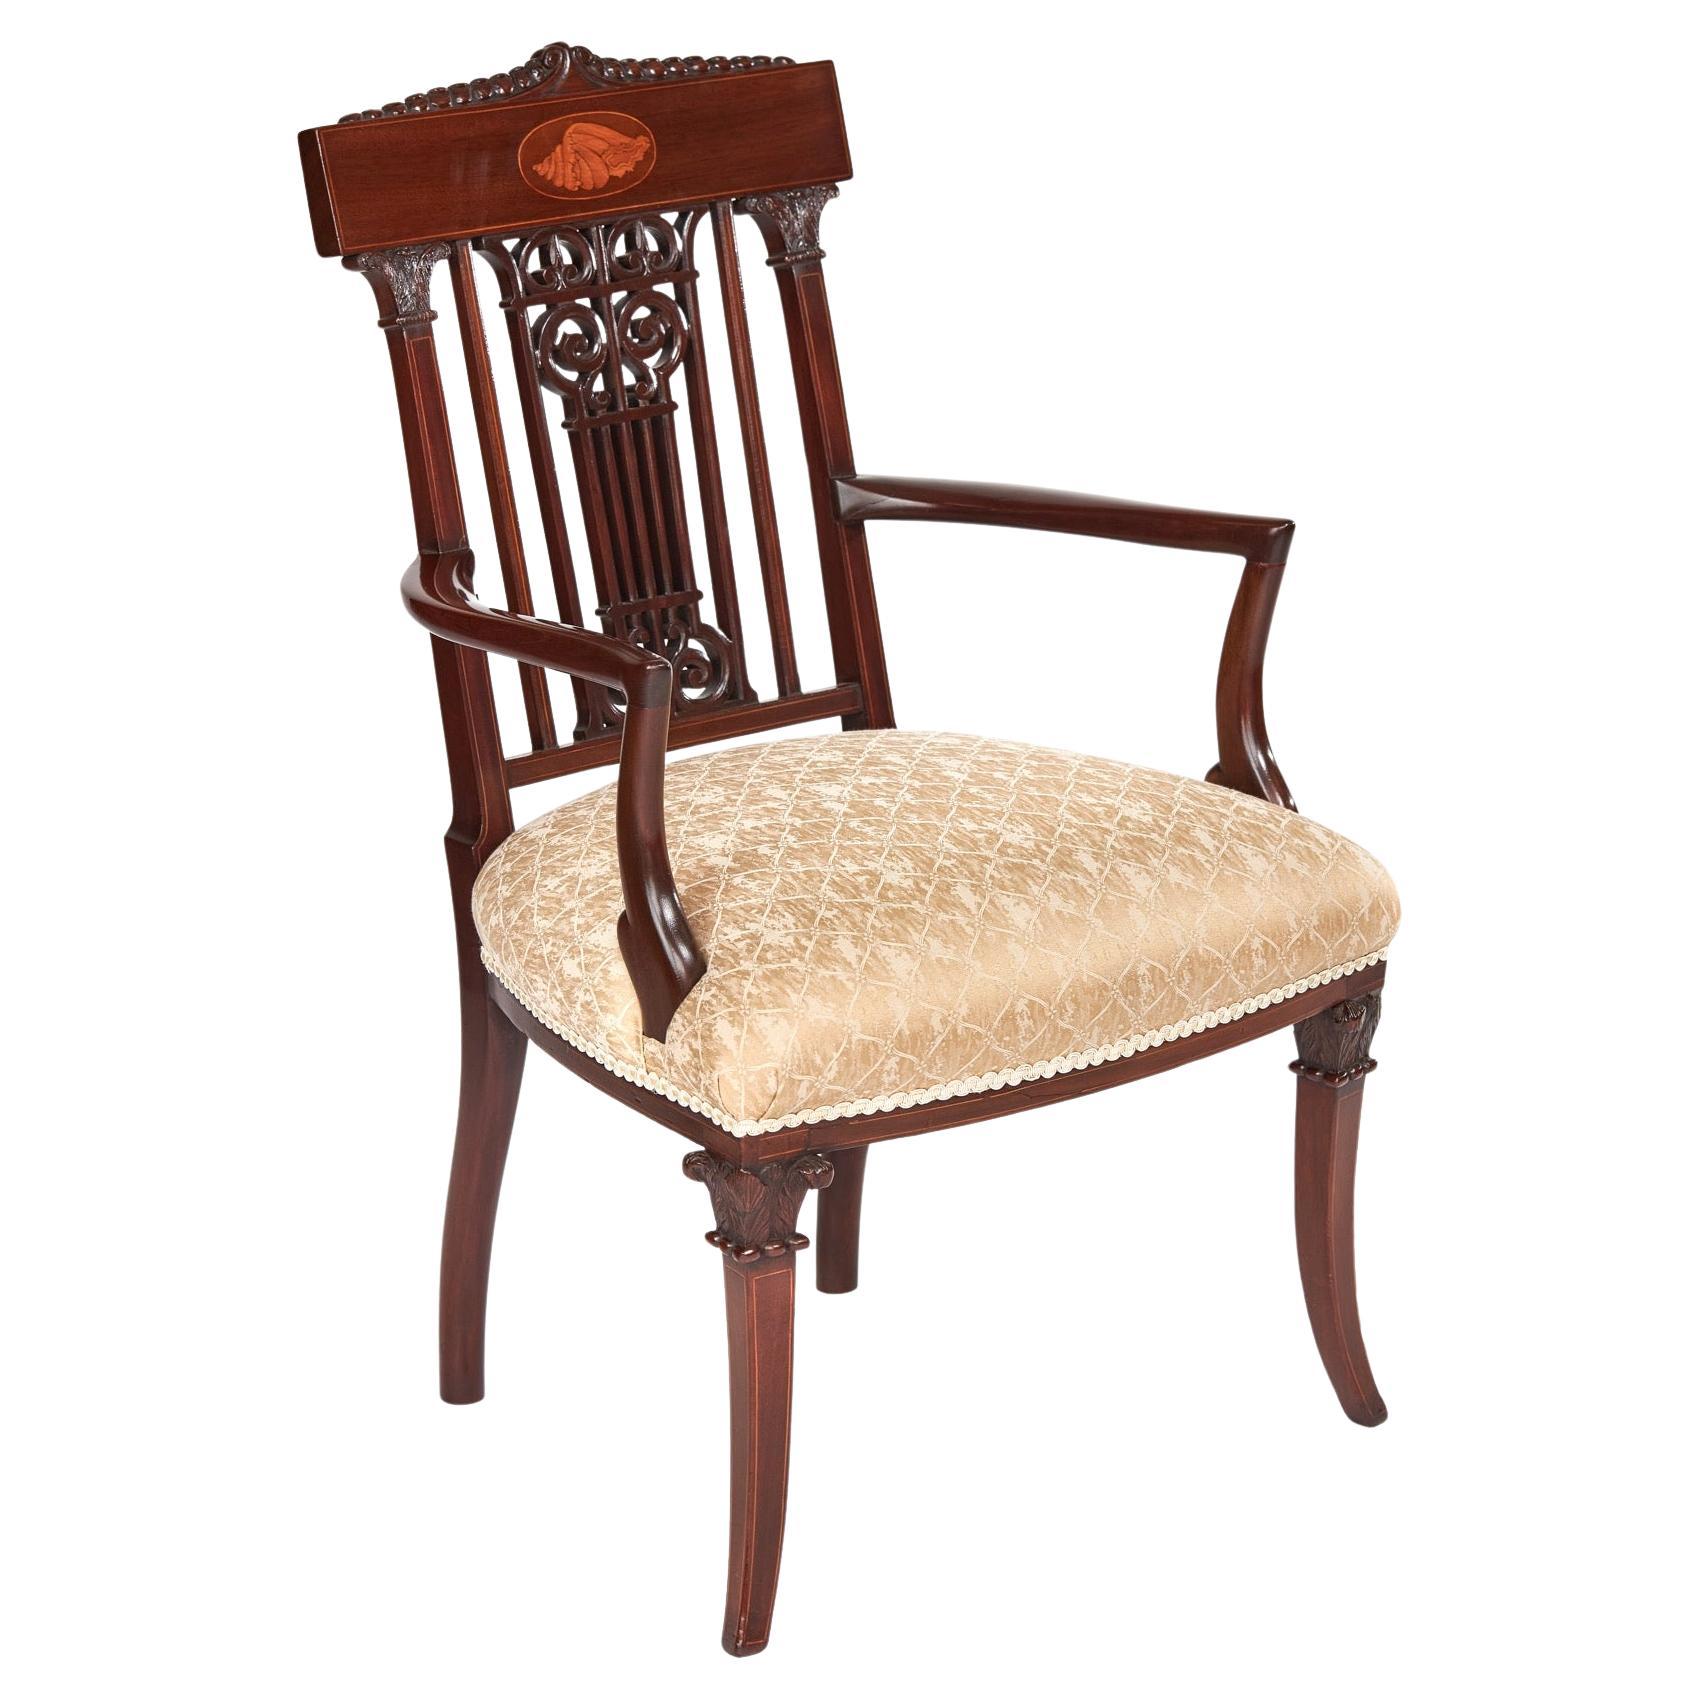 Fine Sheraton Revival Mahogany inlaid & carved Elbow chair